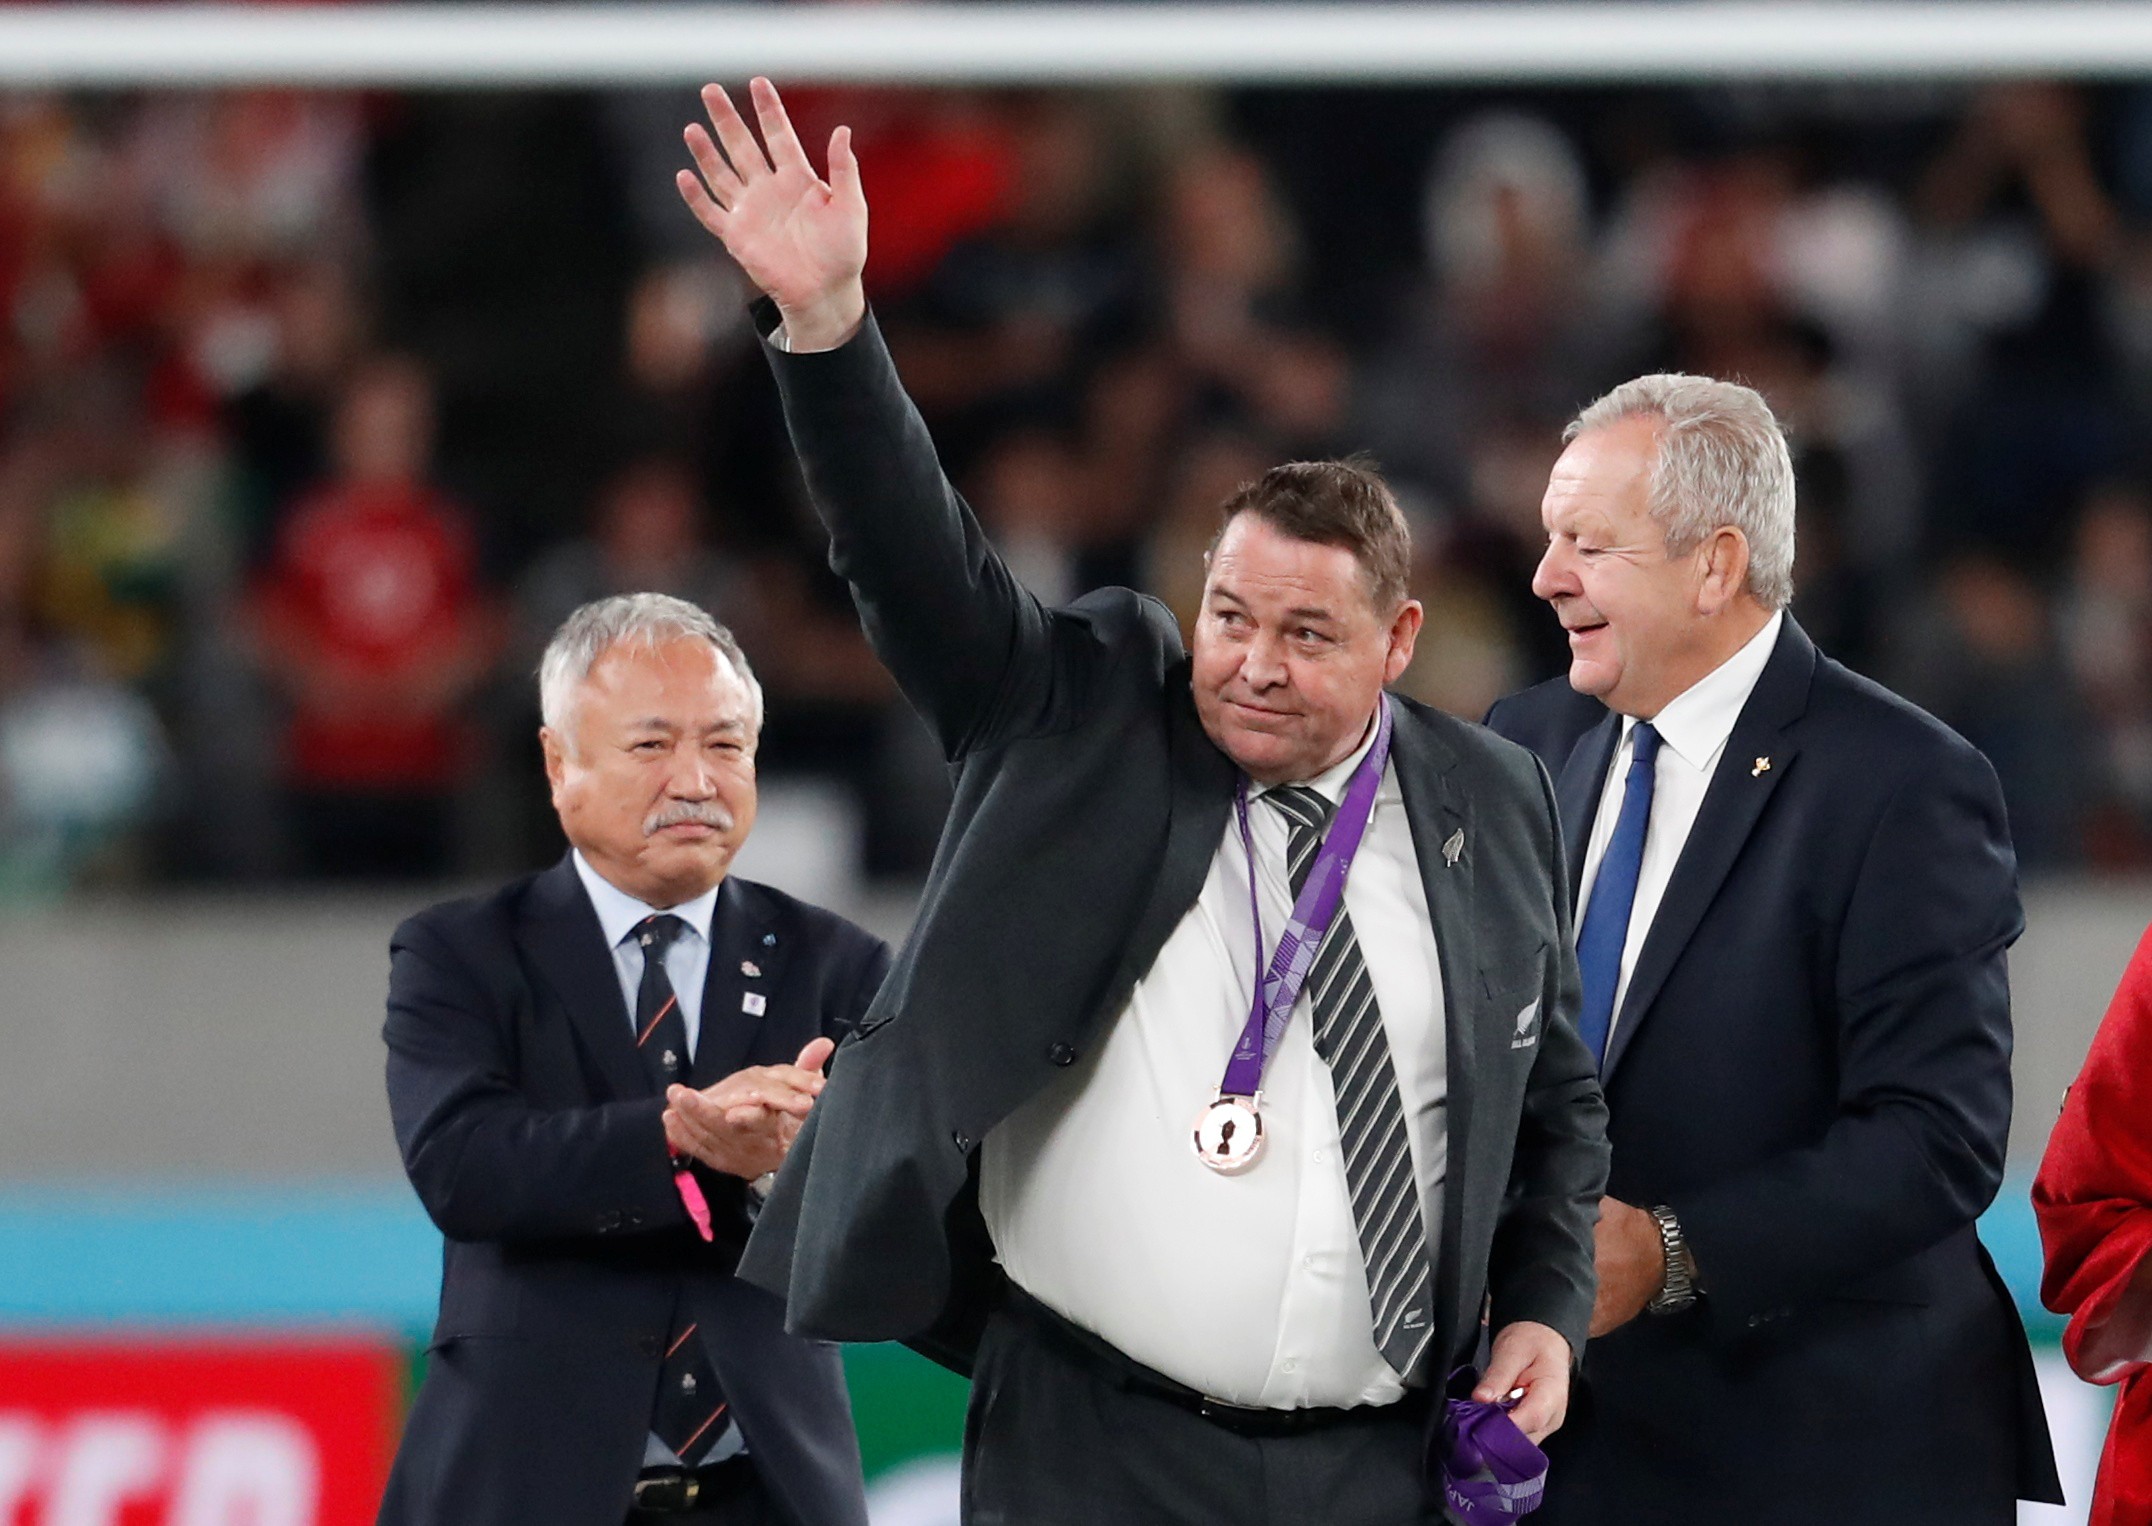 New Zealand head coach Steve Hansen after receiving his bronze medal from Japan Rugby Football Union president Shigetaka Mori and World Rugby chairman Bill Beaumont. Photo: Reuters